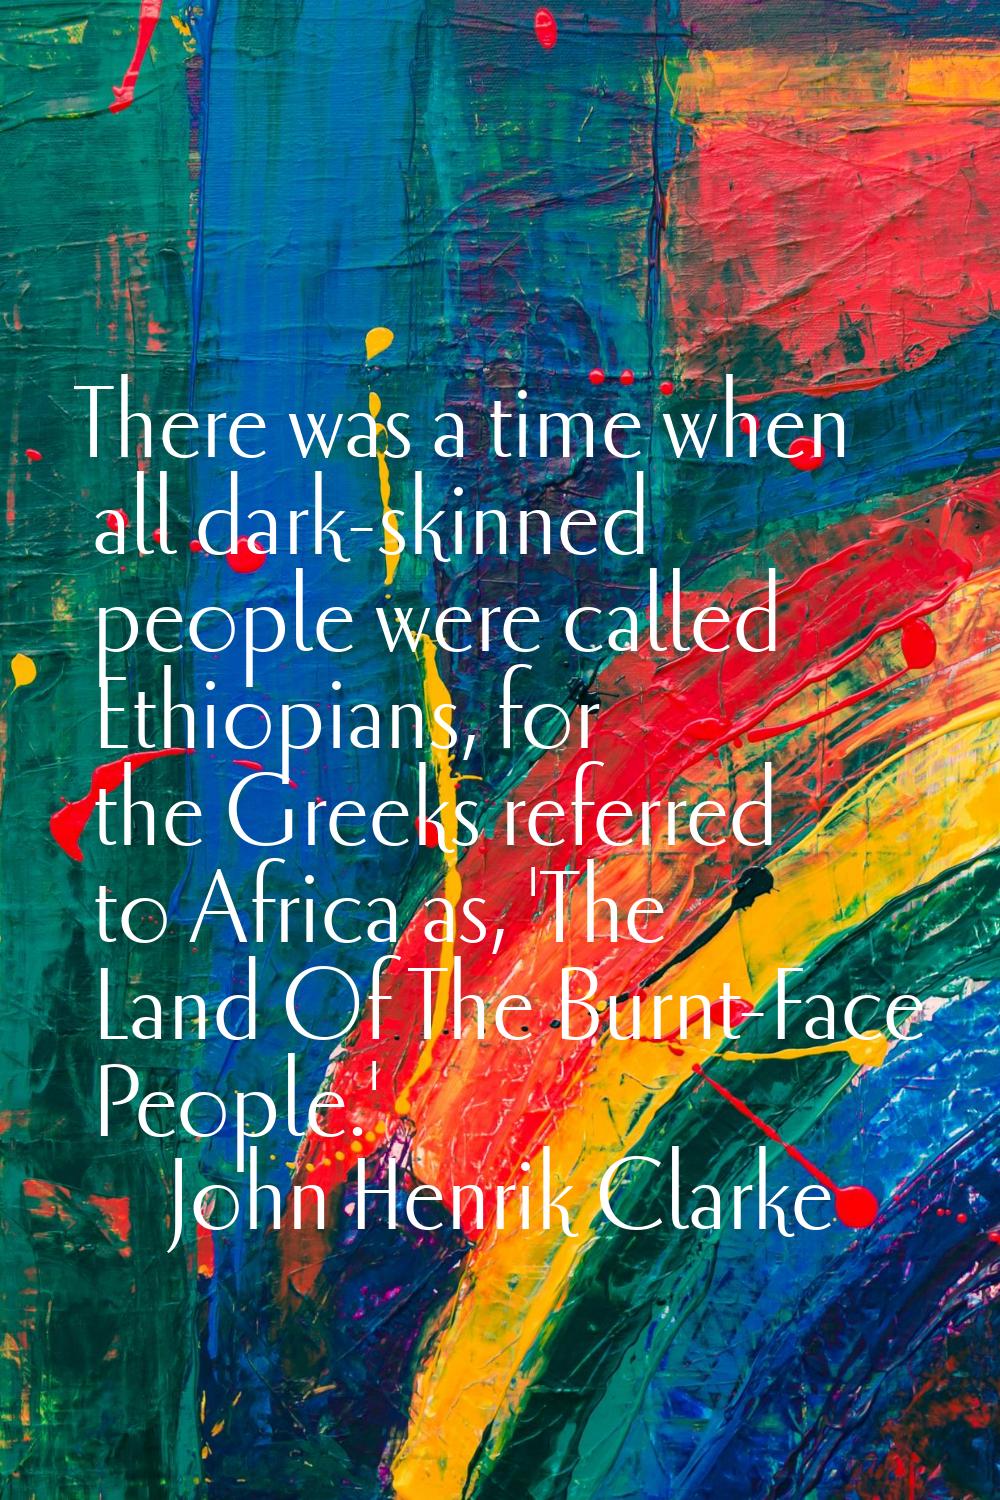 There was a time when all dark-skinned people were called Ethiopians, for the Greeks referred to Af